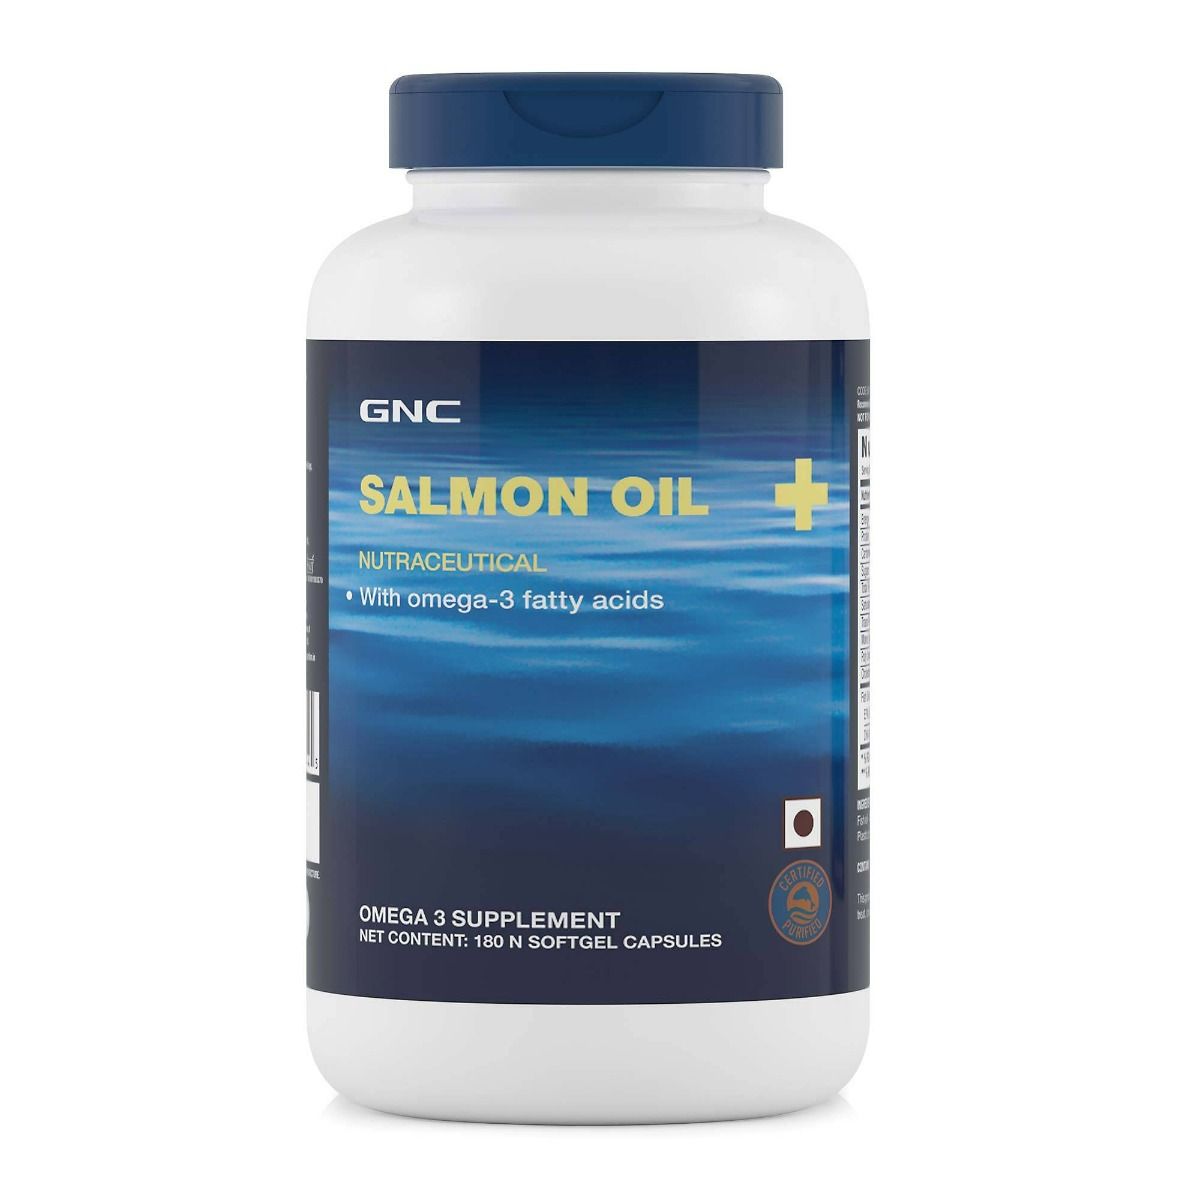 GNC Salmon Oil Plus with Omega-3 Fatty Acids Softgel, 180 Capsules, Pack of 1 